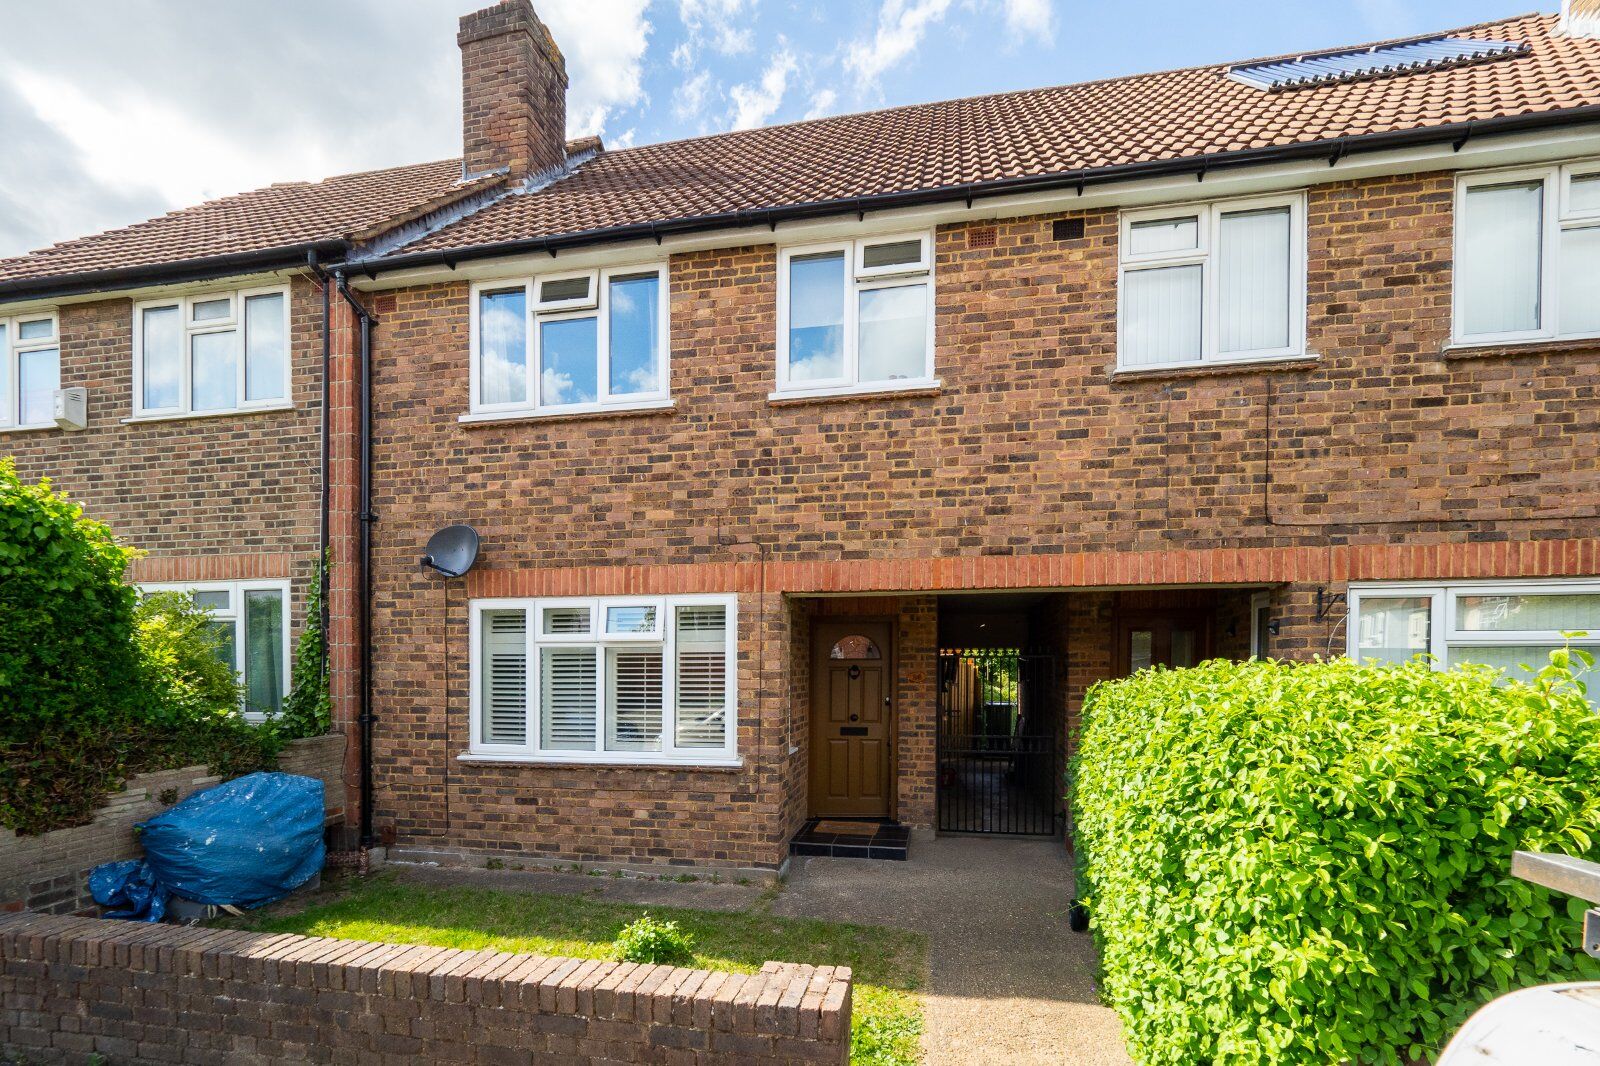 3 bedroom mid terraced house for sale Lingfield Road, Worcester Park, KT4, main image